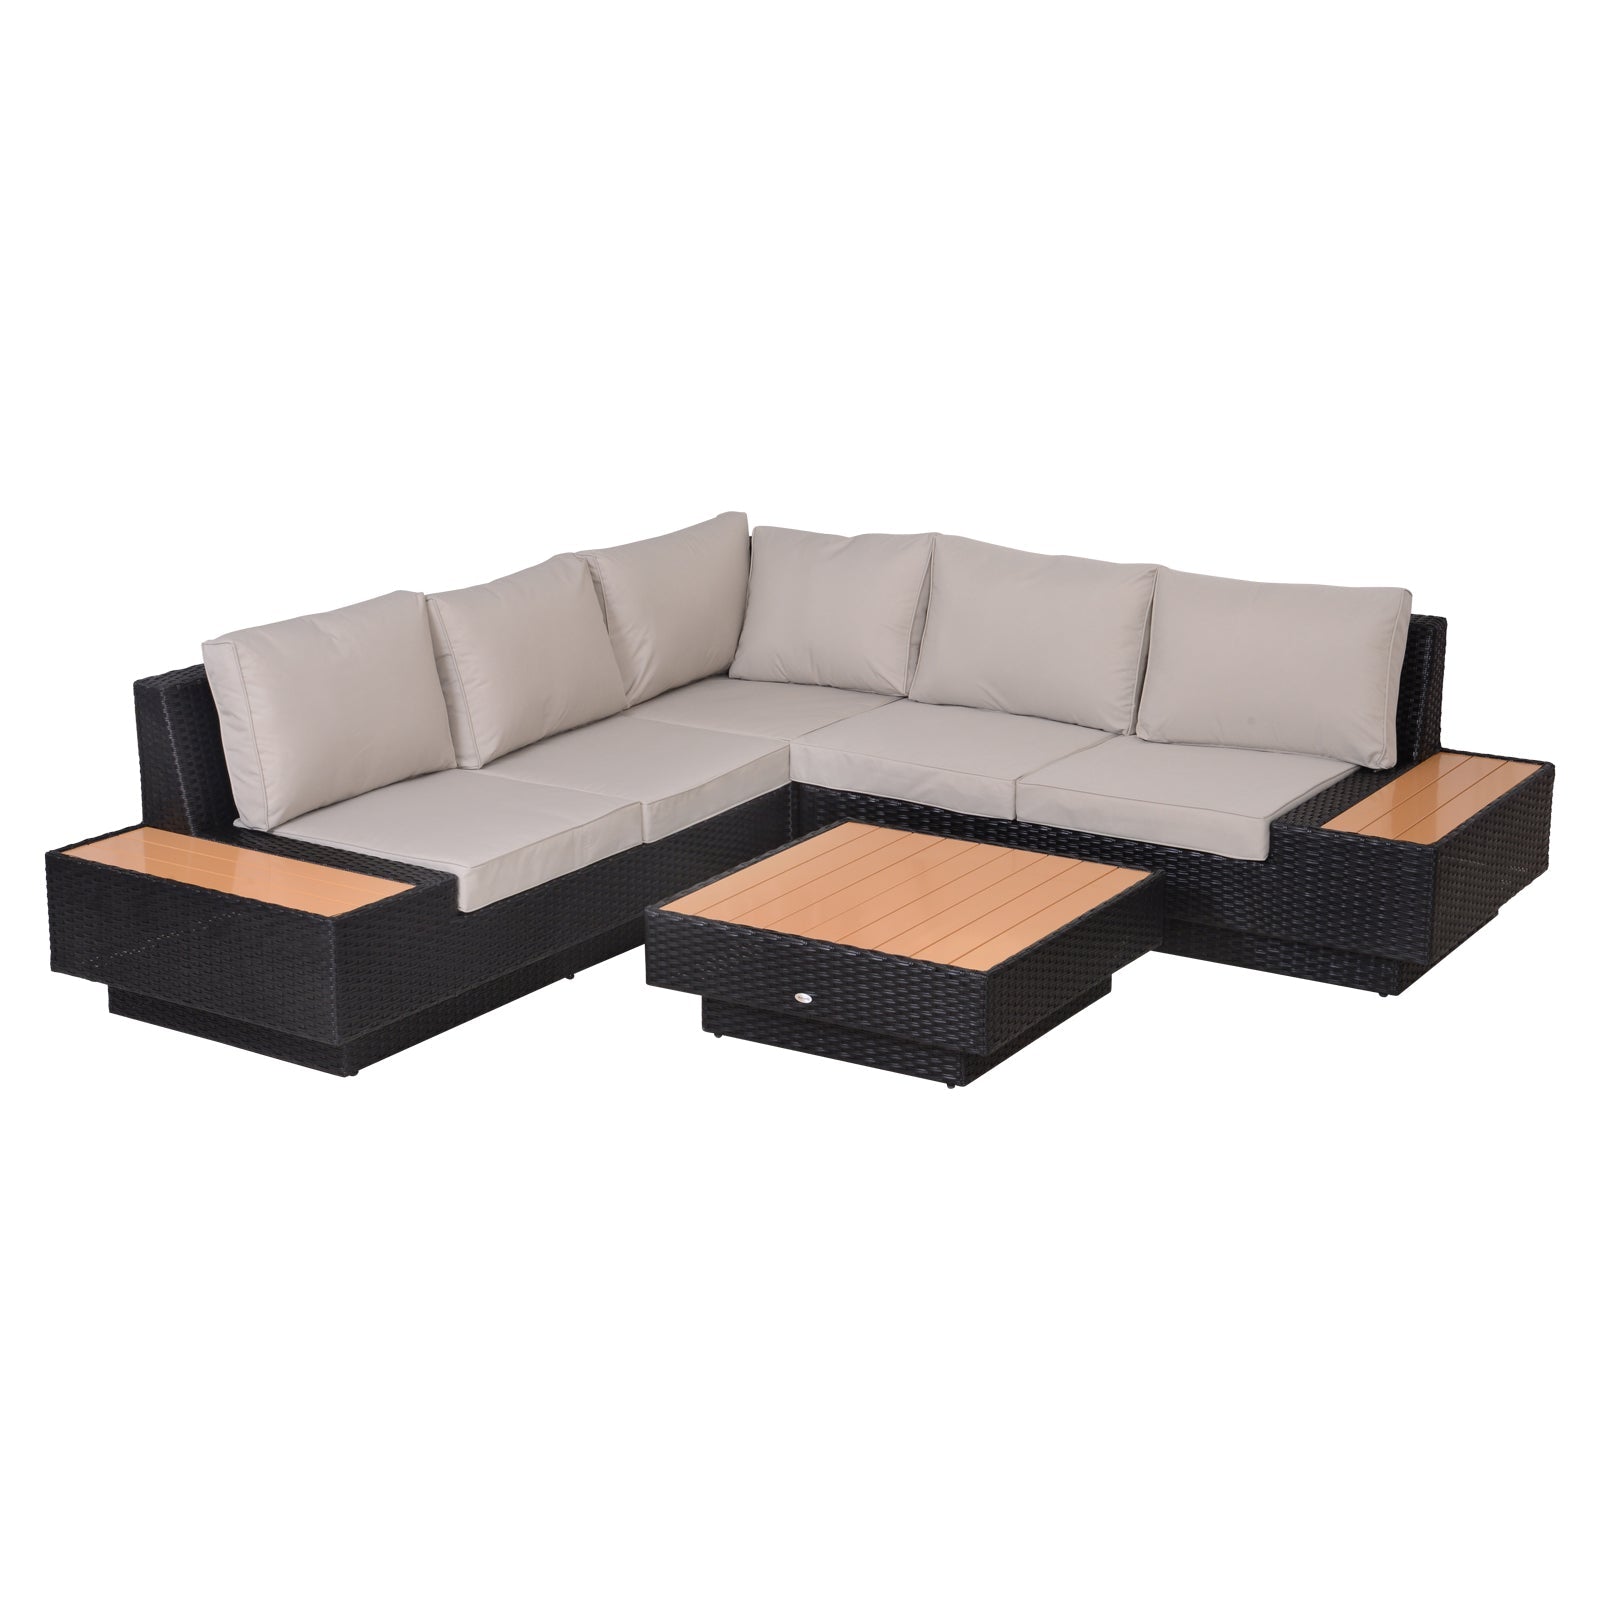 5-Seater Rattan Garden Furniture Outdoor Sectional Corner Sofa and Coffee Table Set Conservatory Wicker Weave w/ Armrest and Cushions, Black-0